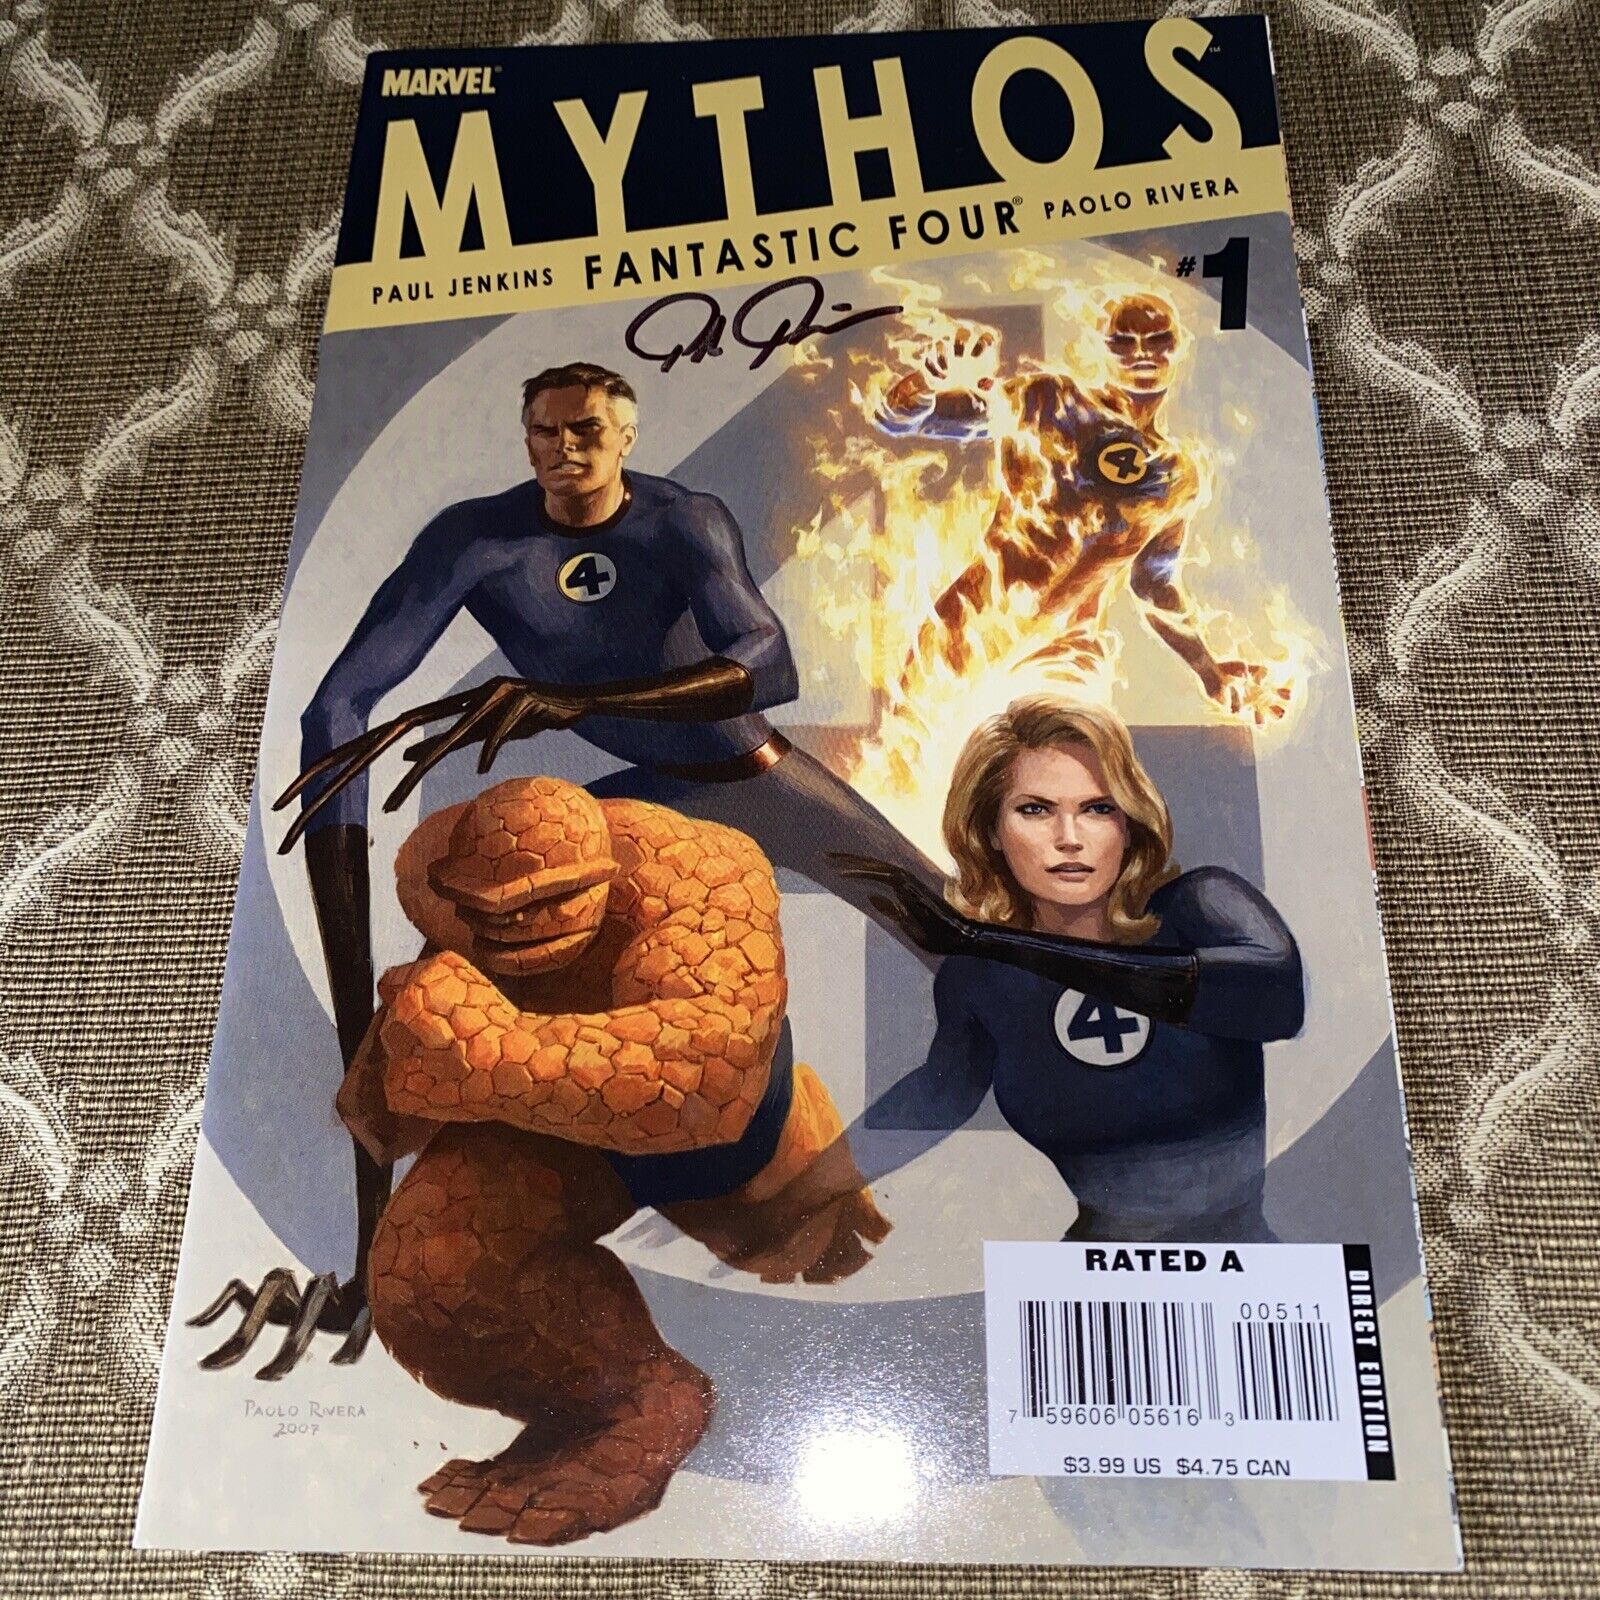 FANTASTIC FOUR MYTHOS #1 SIGNED BY ARTIST PAOLO RIVERA Variant Edition